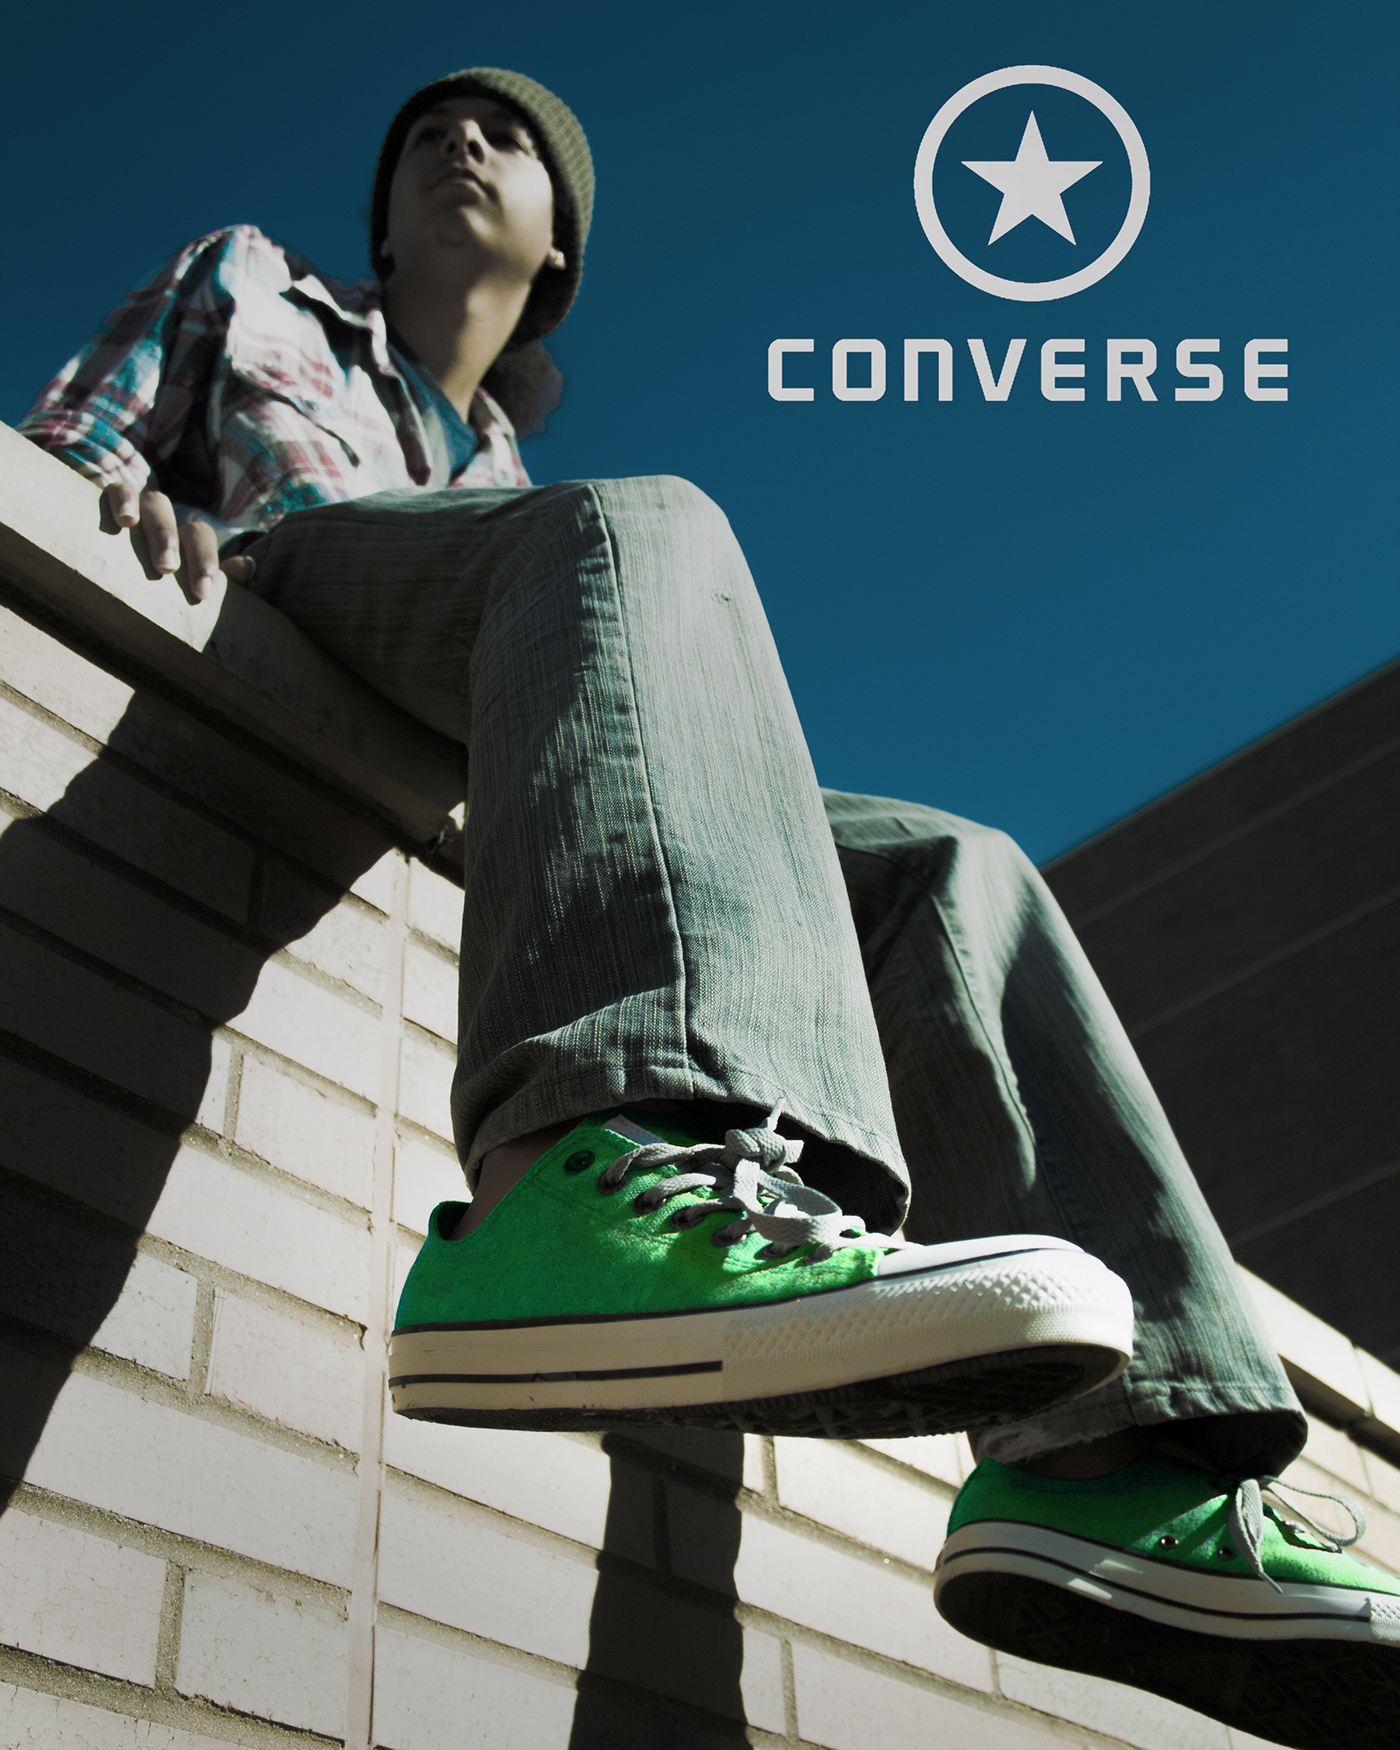 reach mobile tight Converse Ad photography on Behance